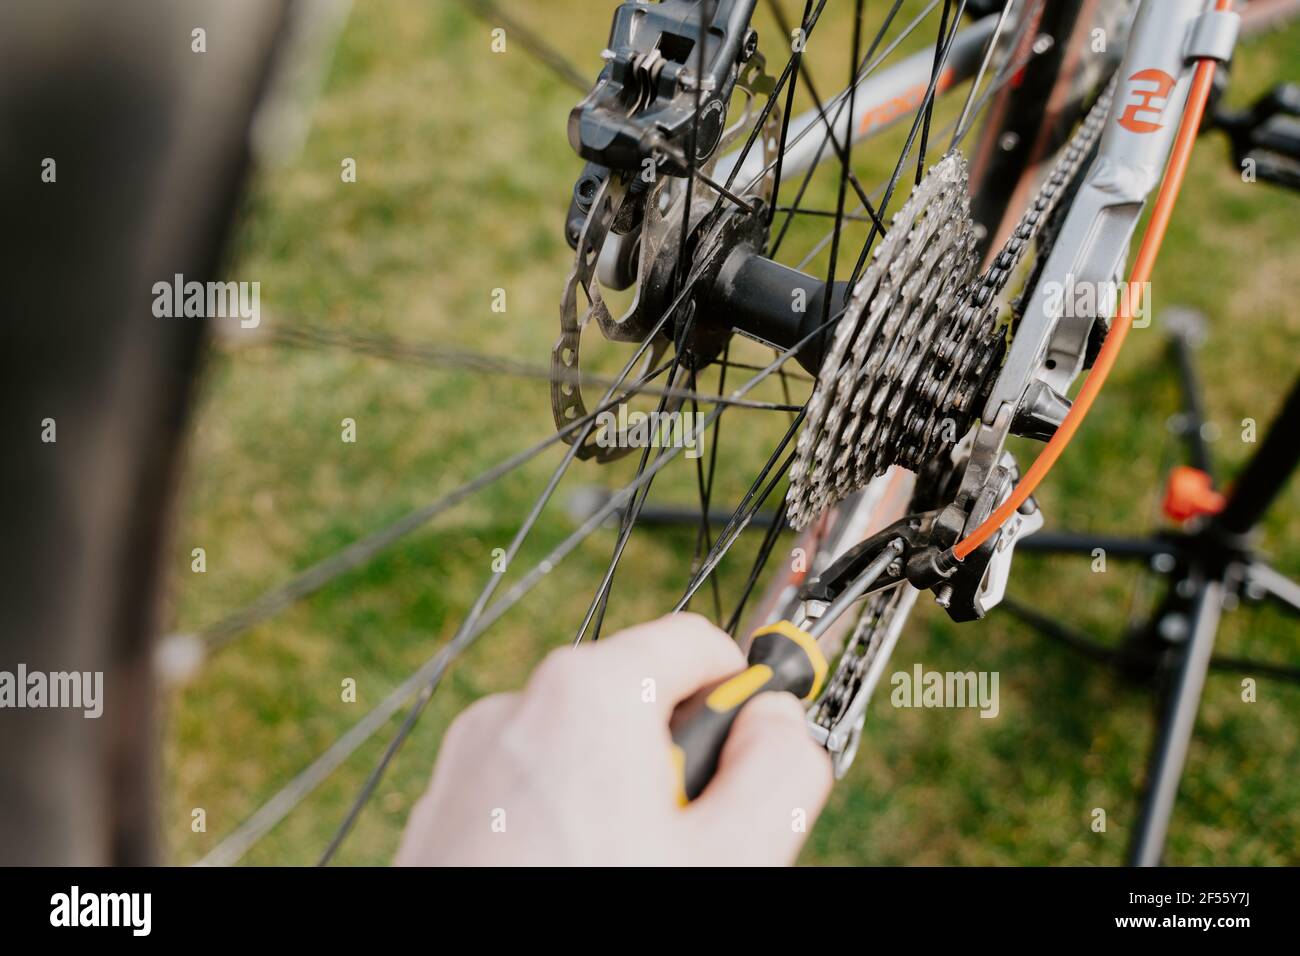 Closeup of bicycle mechanic with a screwdriver repairing bicycle Stock Photo